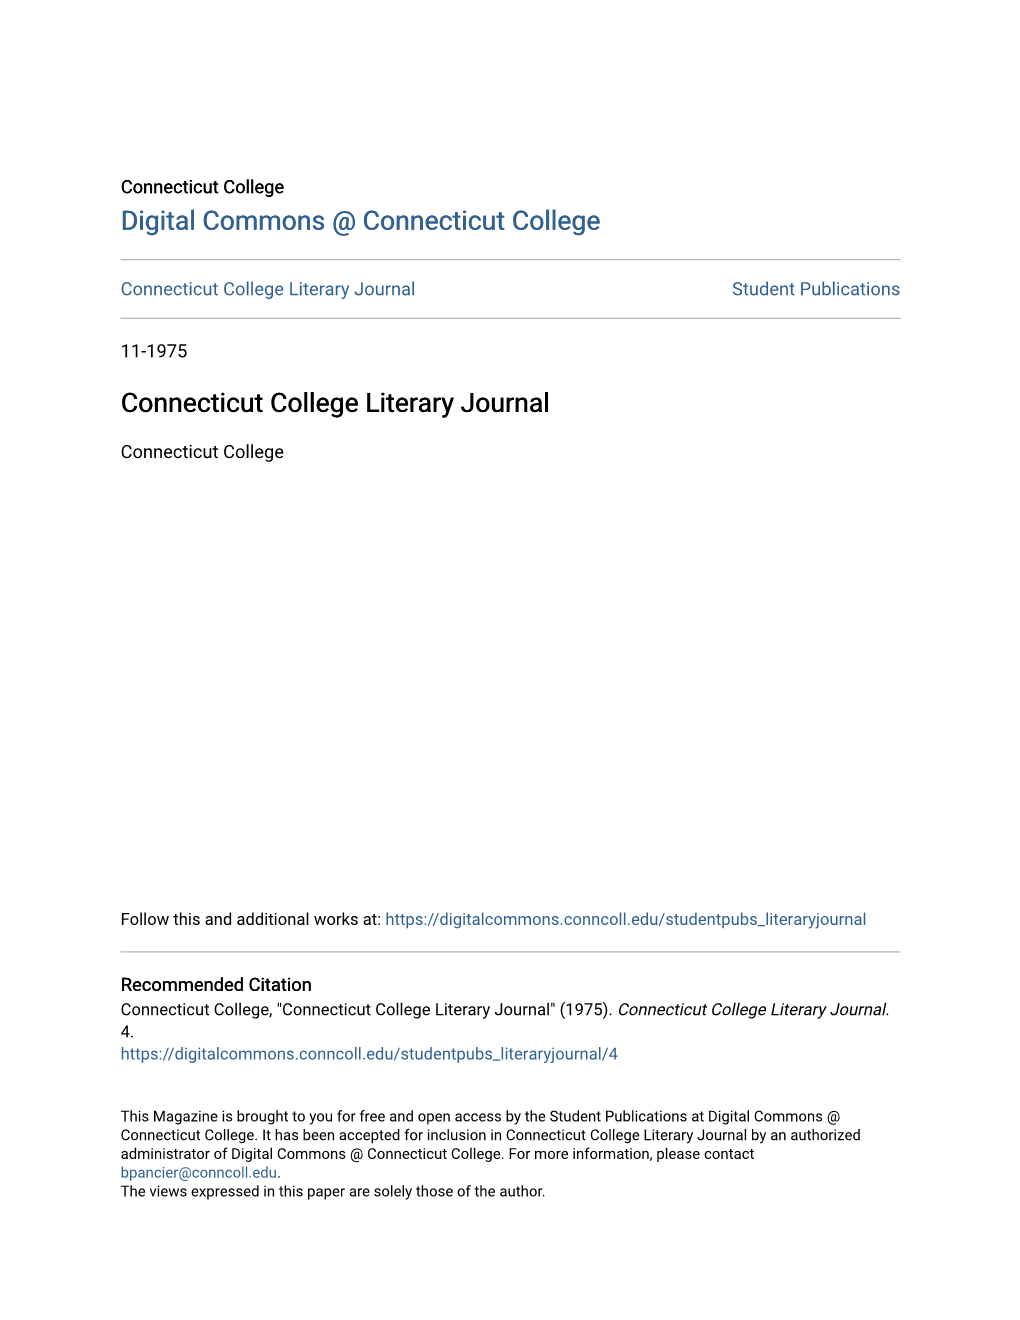 Connecticut College Literary Journal Student Publications